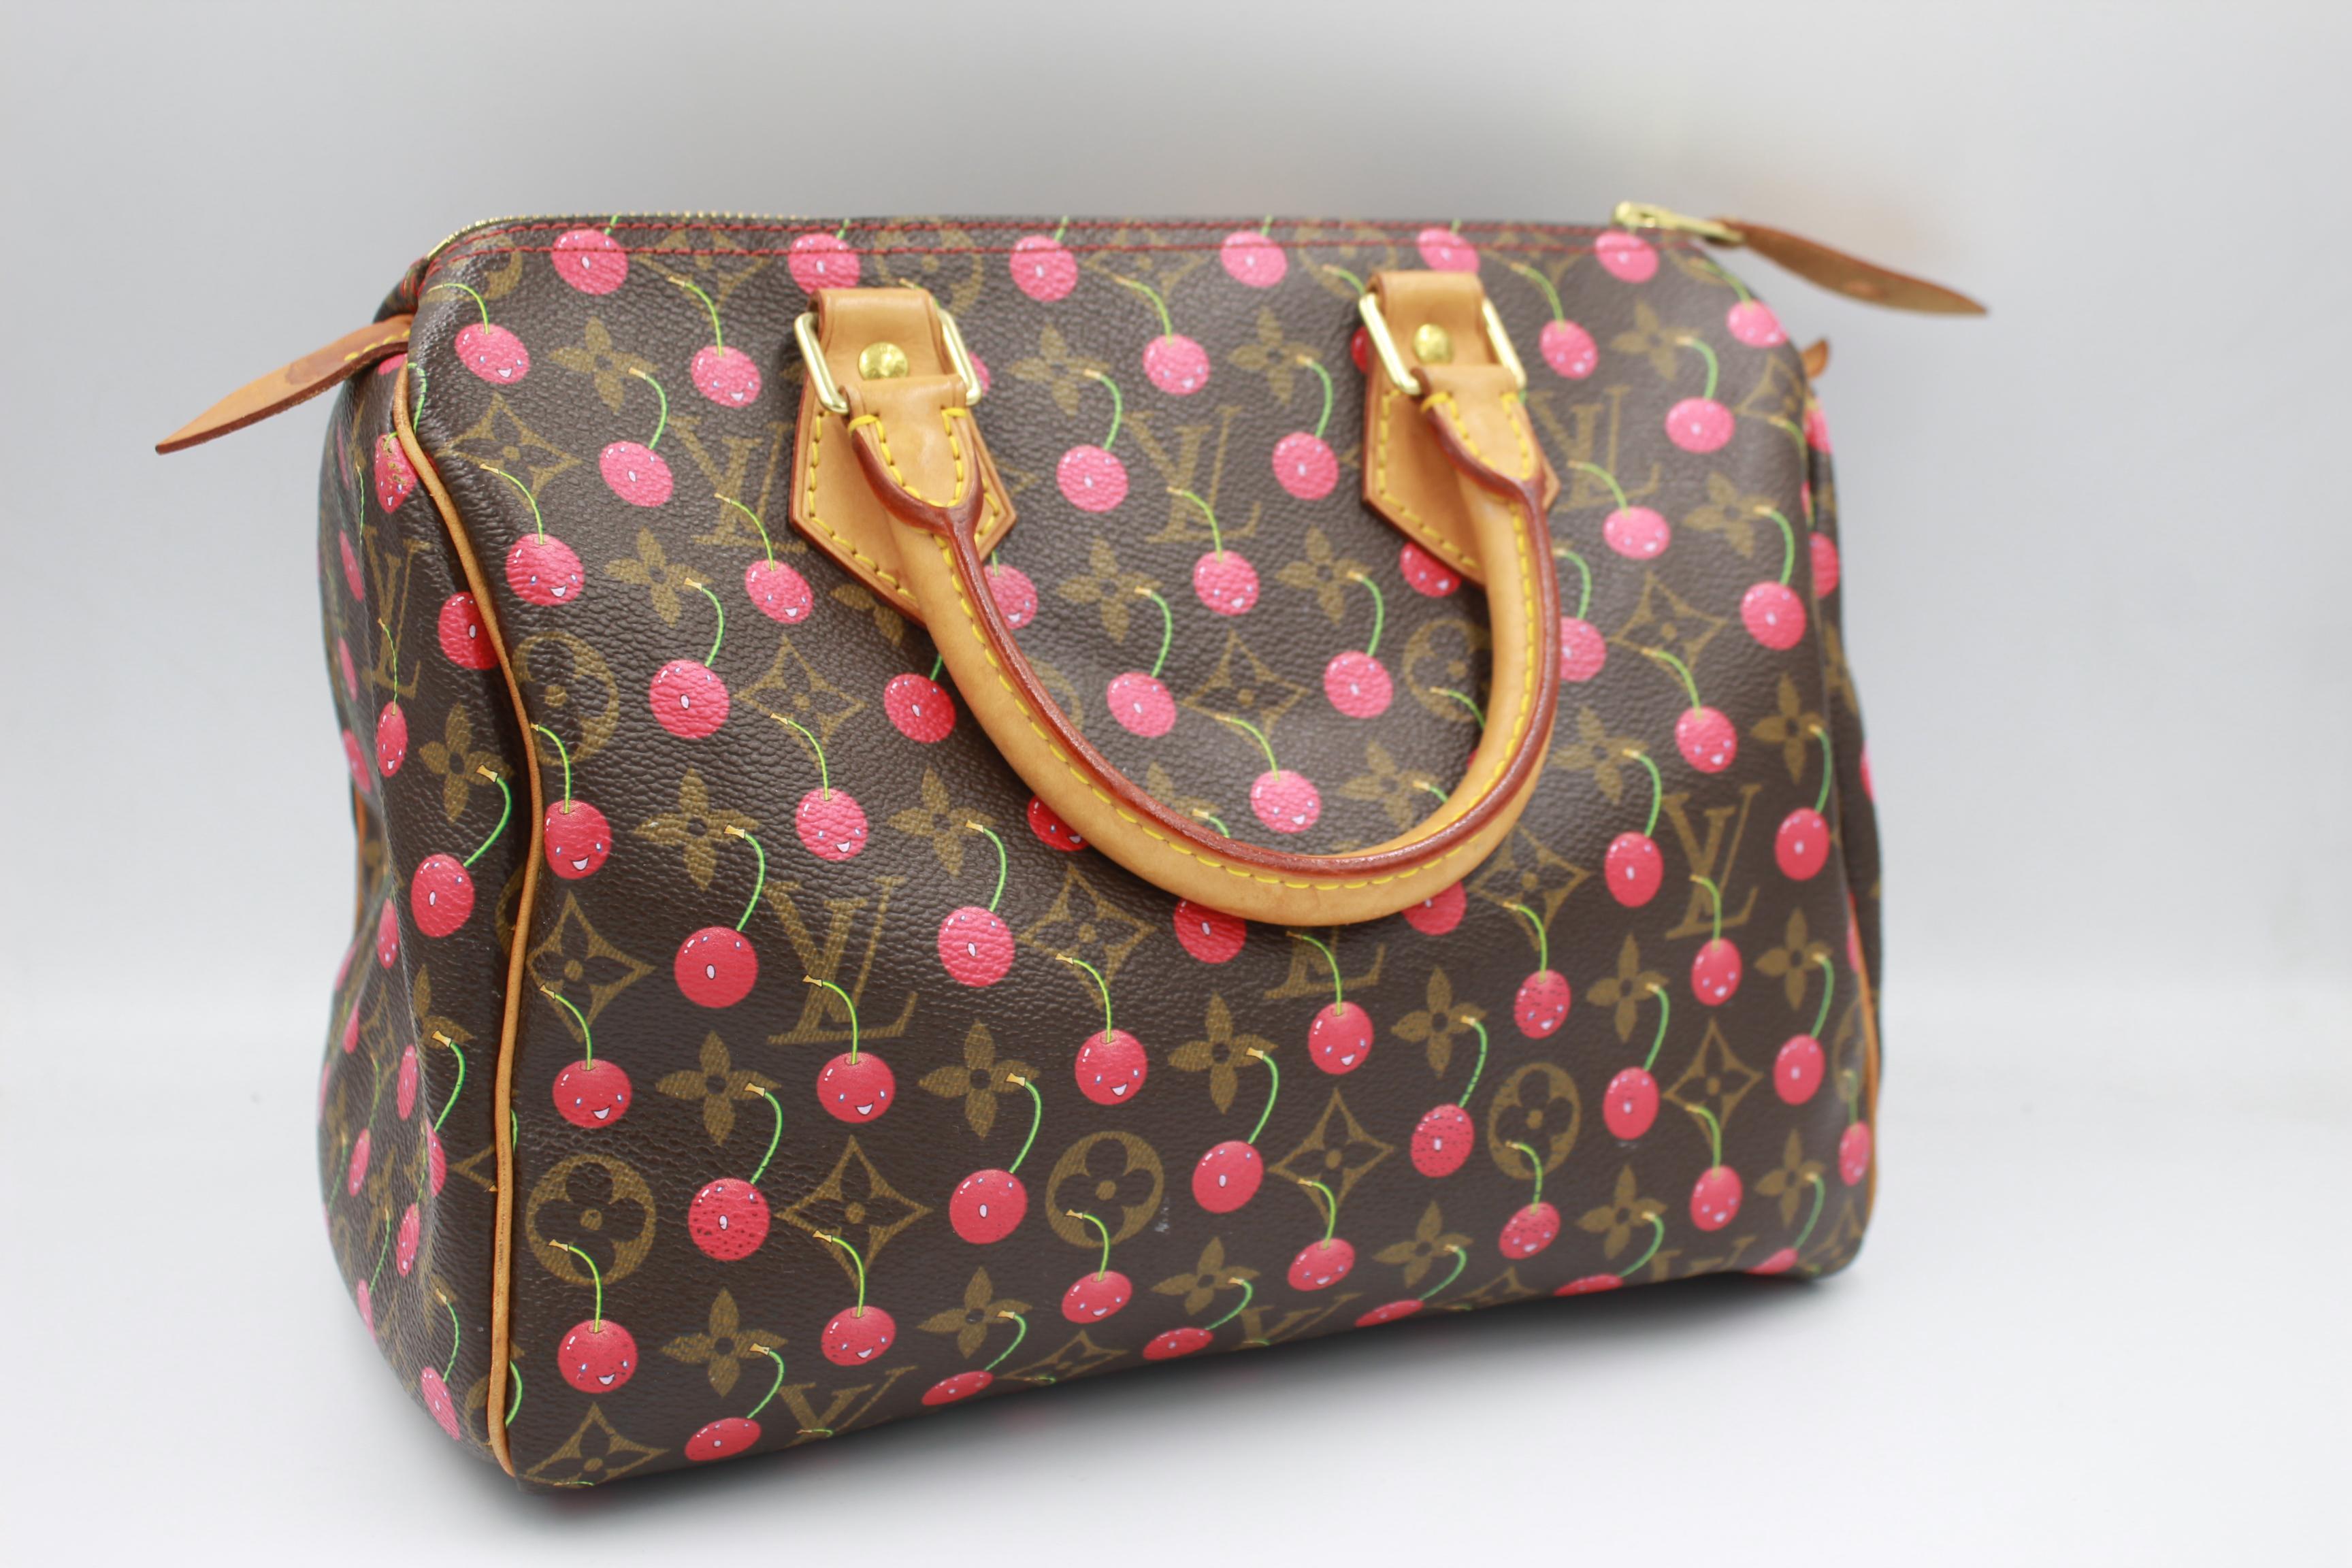 Louis Vuitton Speedy 25 handbag with cherries, by haruki Murakami.
Limited edition.
In monogram canvas with cherries.
Good condition, with some signs of wear ( some stains on the leather finishes ).
18cm x 25cm x 14cm

